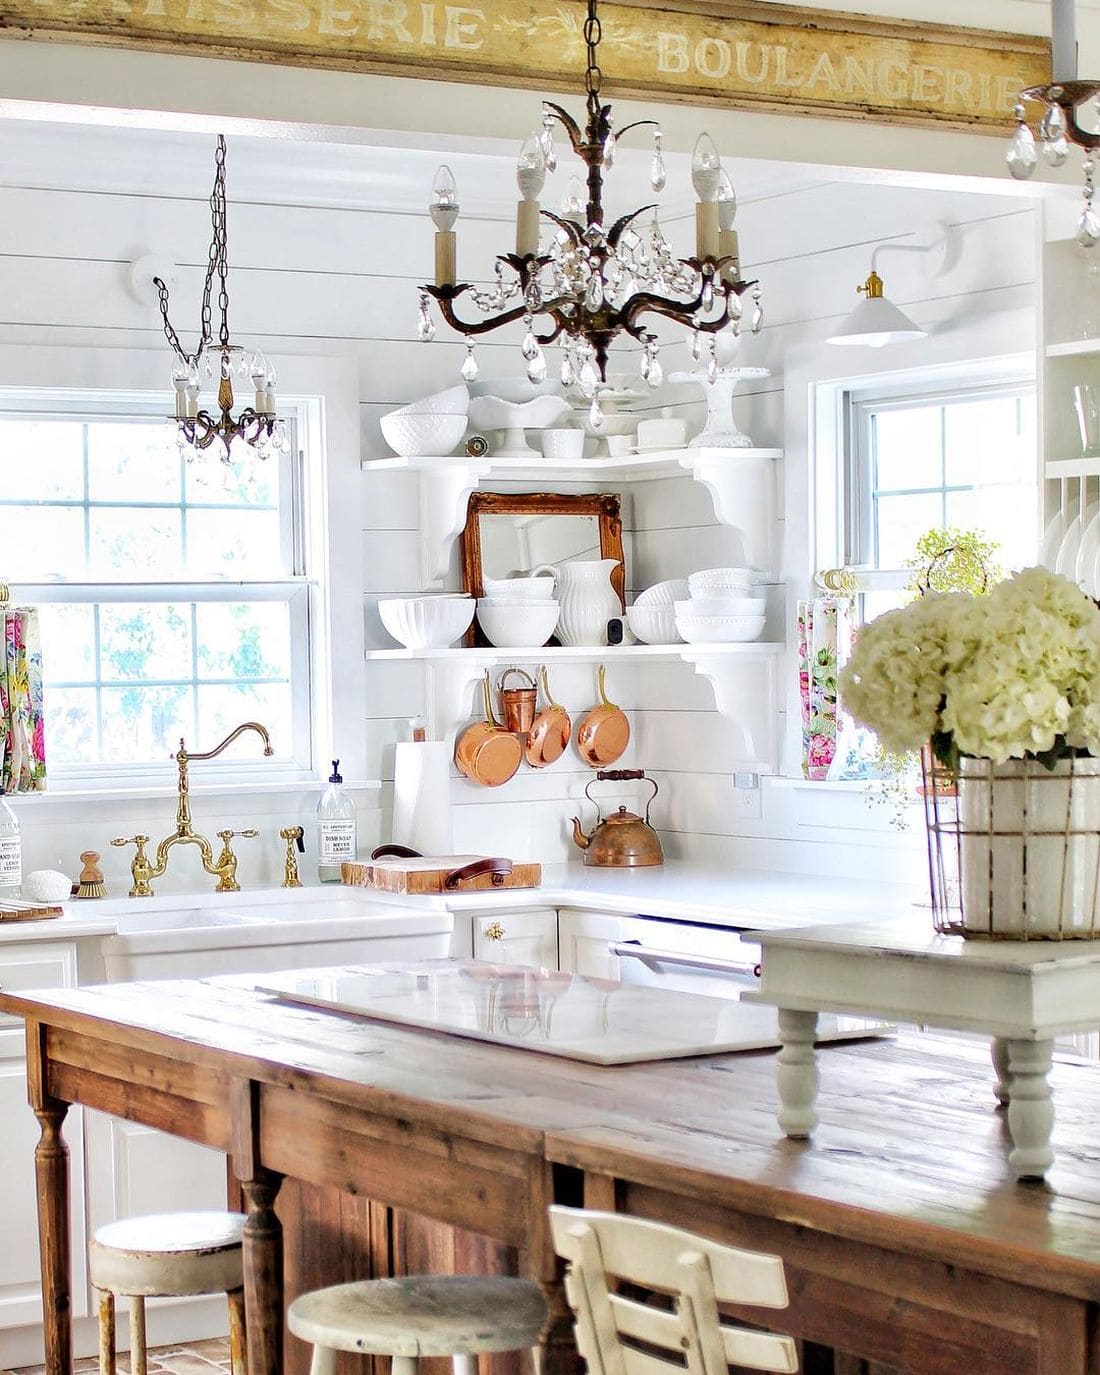 shiplap walls, brass kitchen faucet, vintage chandeliers in this vintage inspired French kitchen